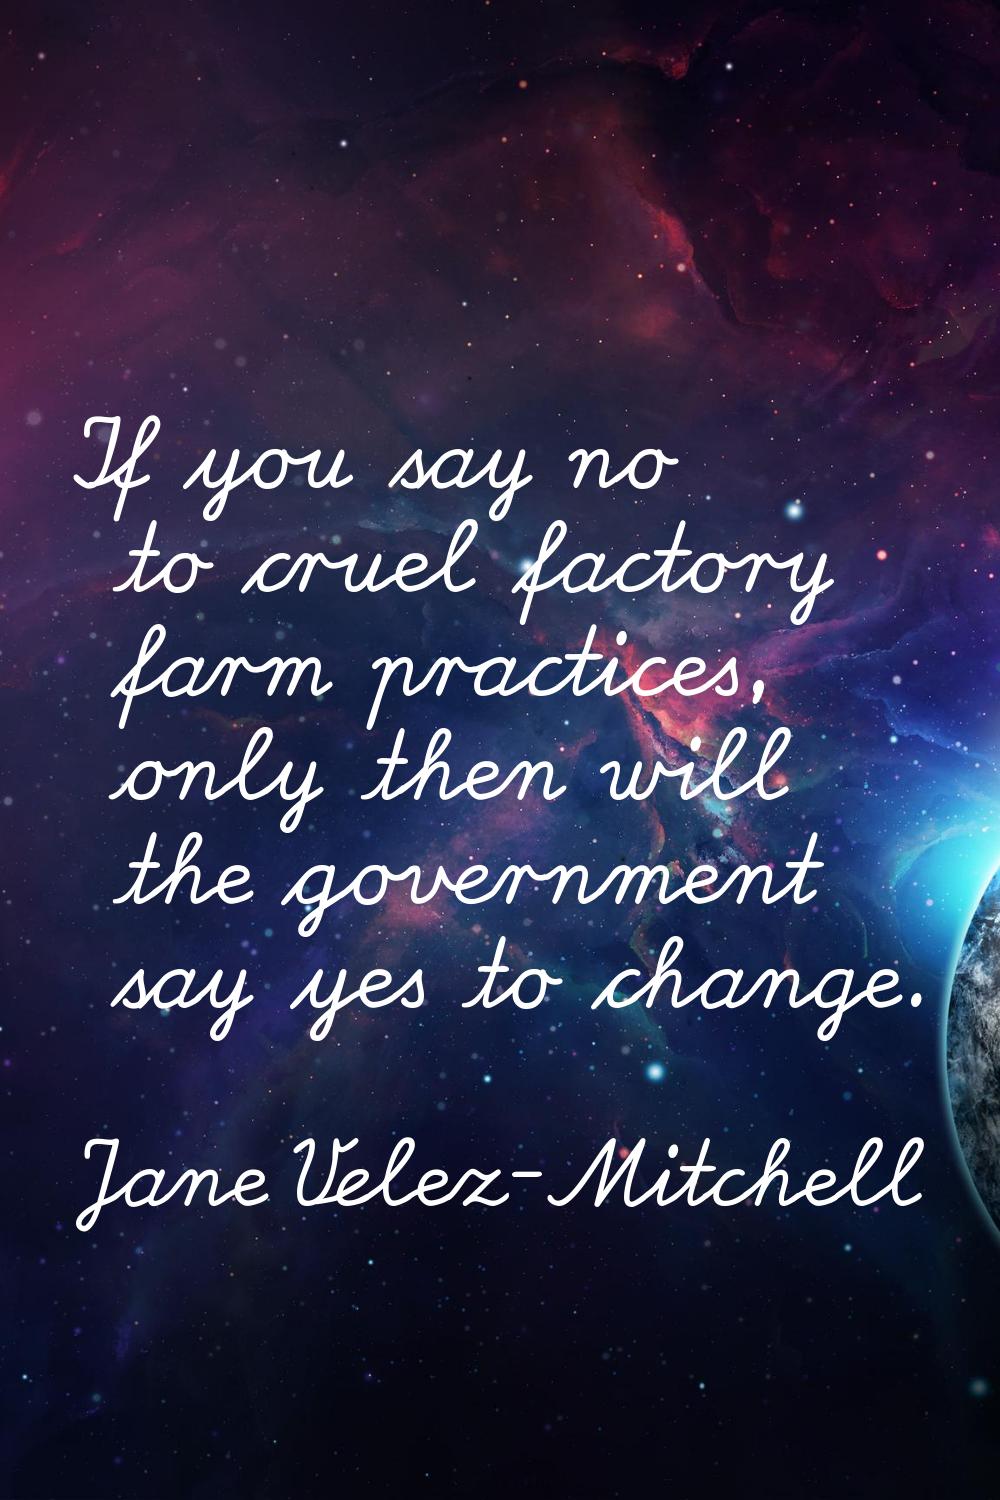 If you say no to cruel factory farm practices, only then will the government say yes to change.